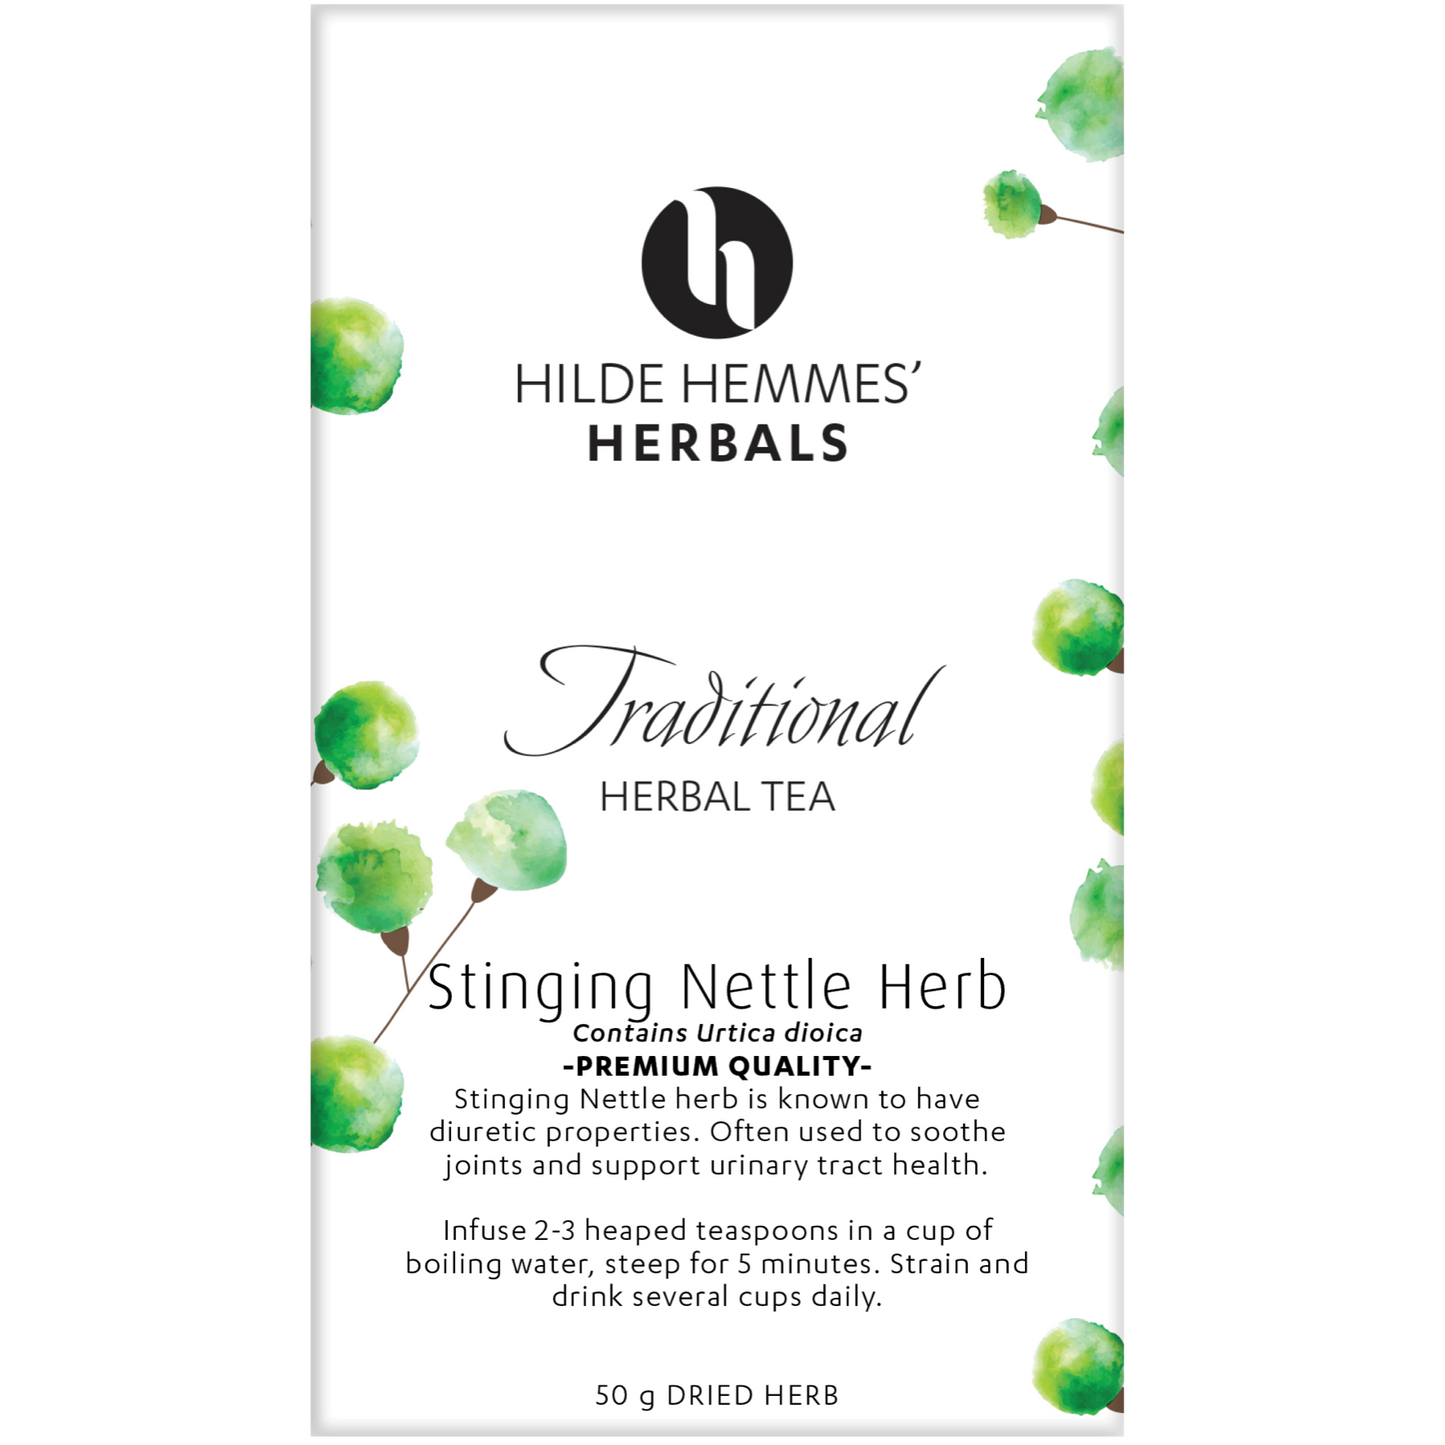 Hilde Hemmes' Herbals Stinging Nettle Herb Tea 50g Dried Herb, Soothe Joints & Supports The Urinary Tract